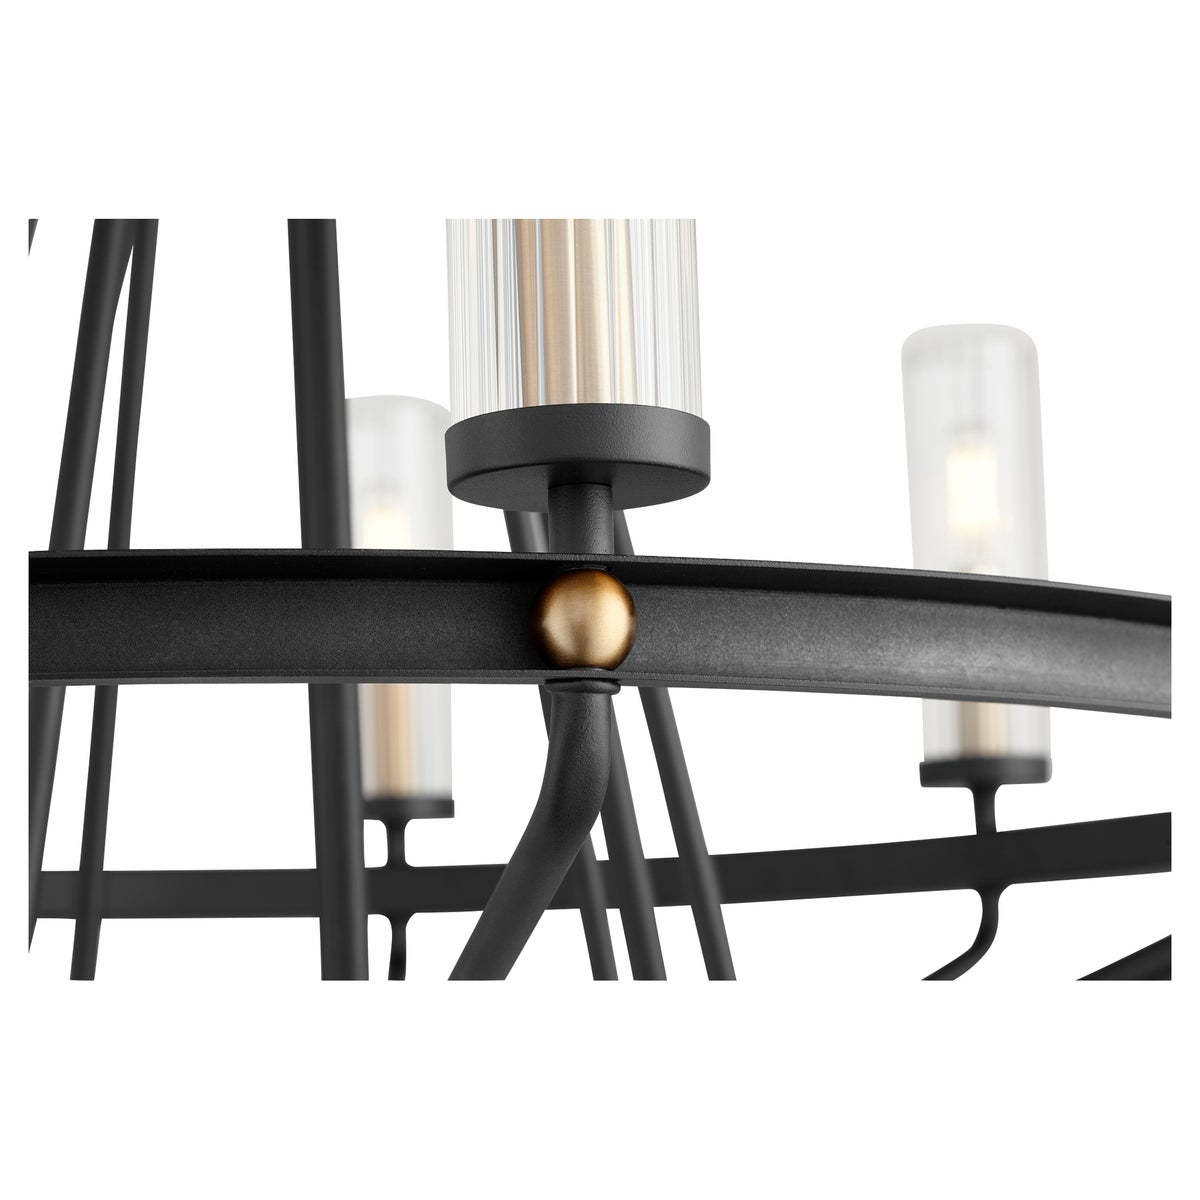 Ring chandelier with close-up view. Modern design brings radiant lighting quality to any interior space.